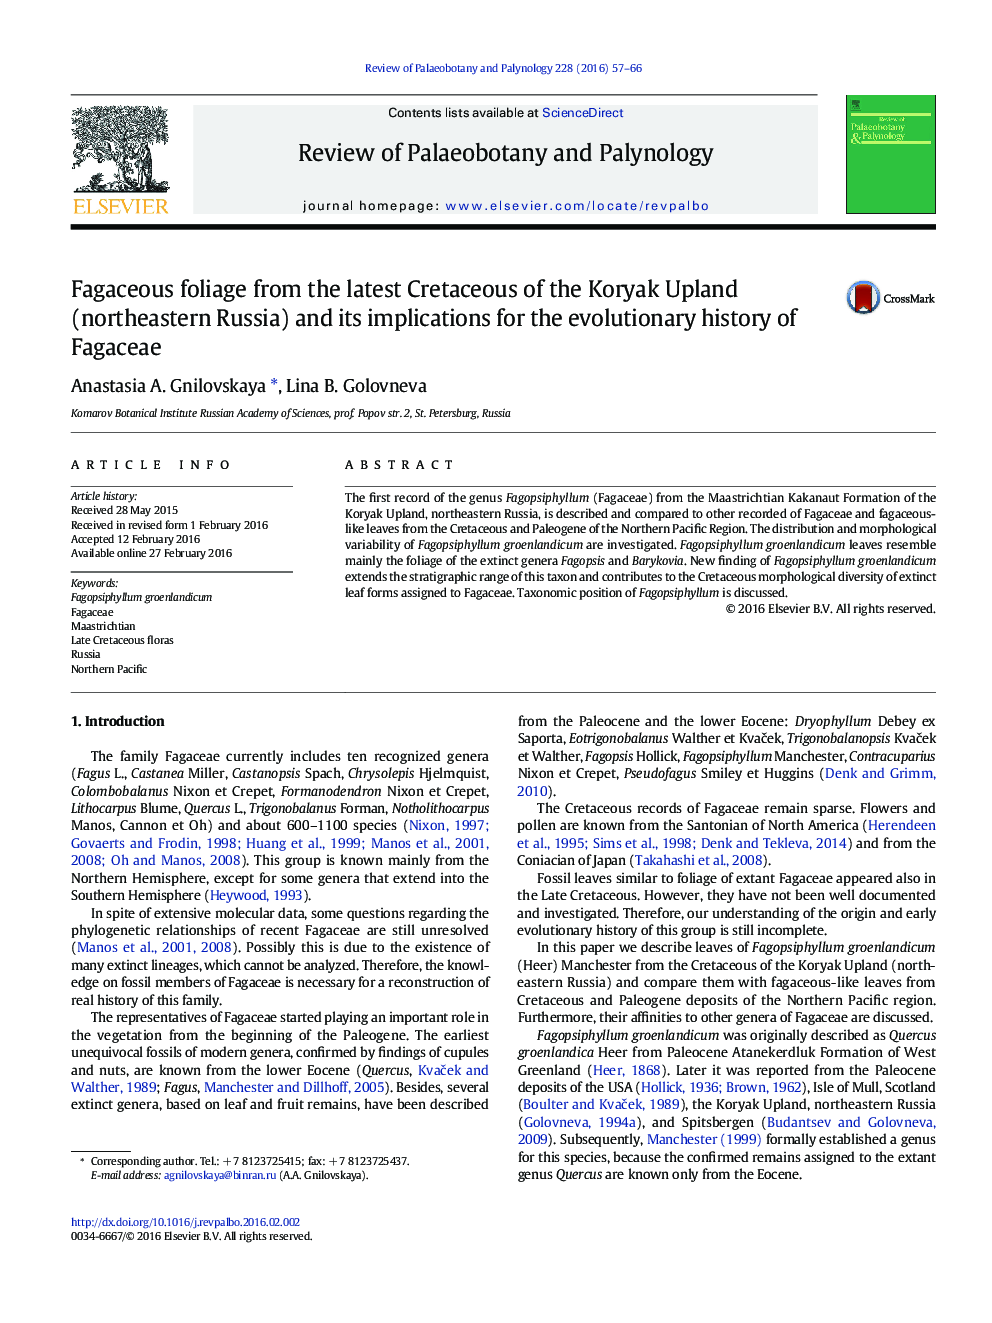 Fagaceous foliage from the latest Cretaceous of the Koryak Upland (northeastern Russia) and its implications for the evolutionary history of Fagaceae